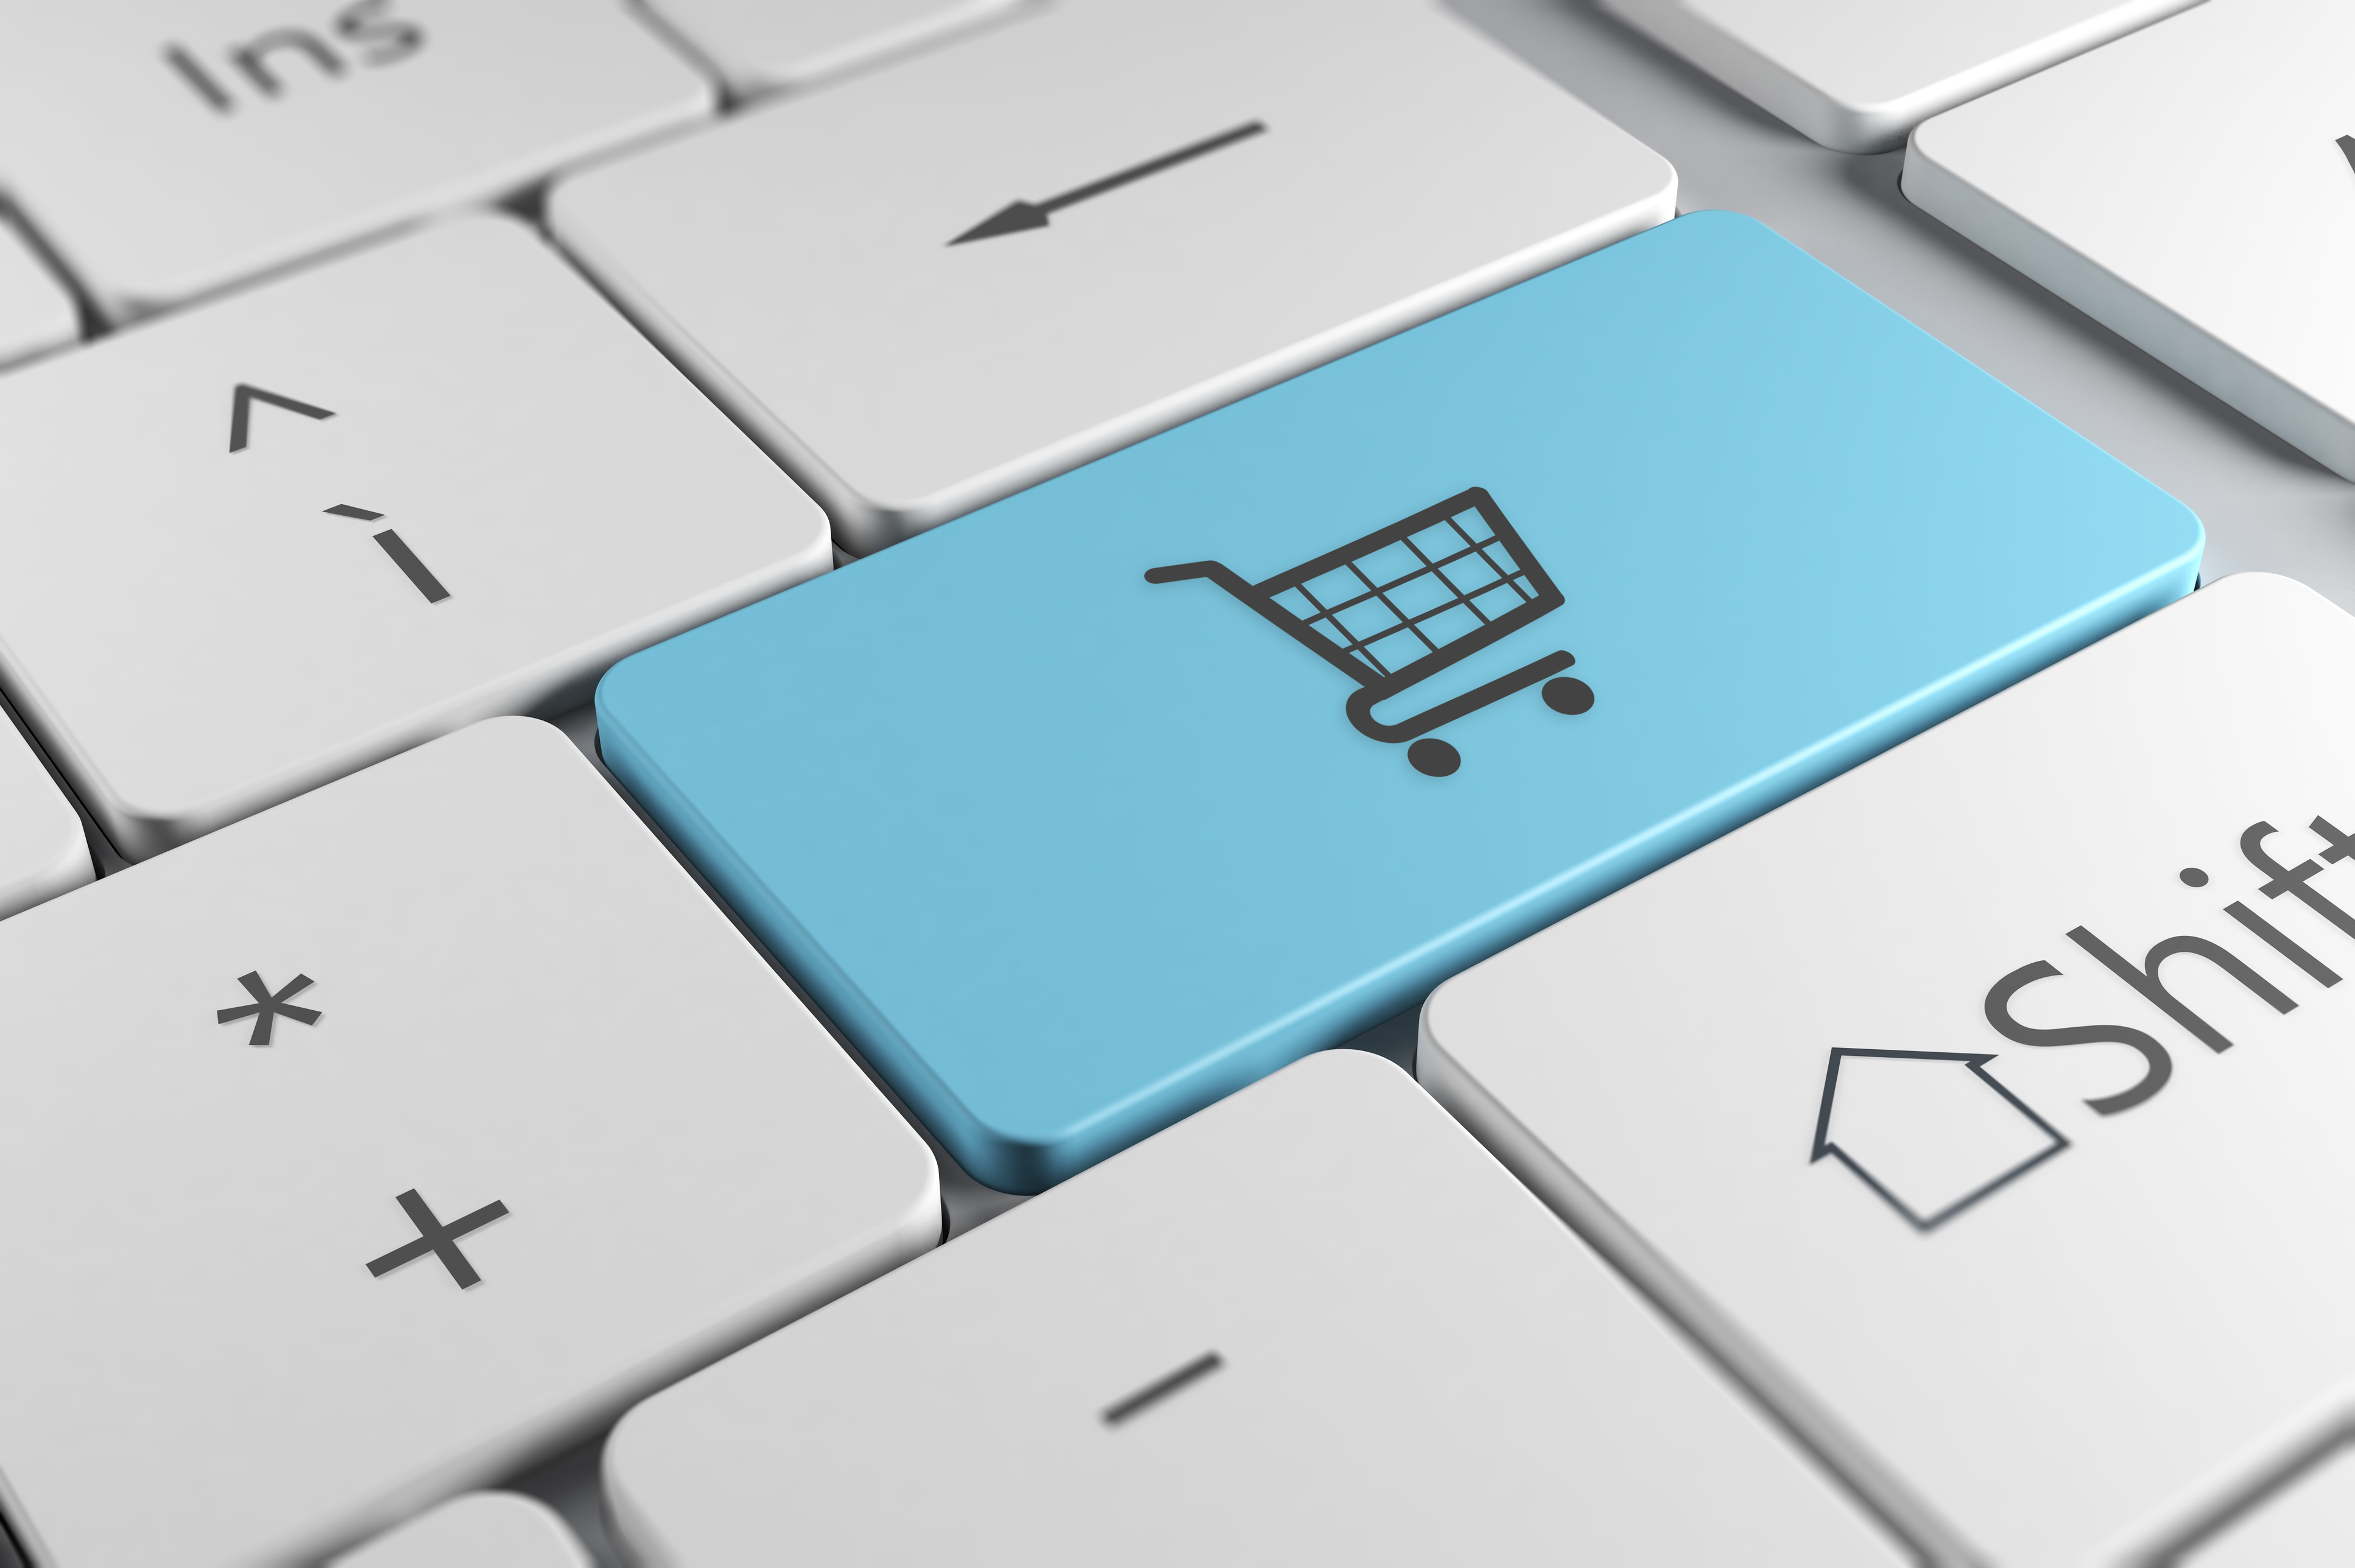 Make online purchases directly using a blue button with shopping cart icon in a elegant keyboard